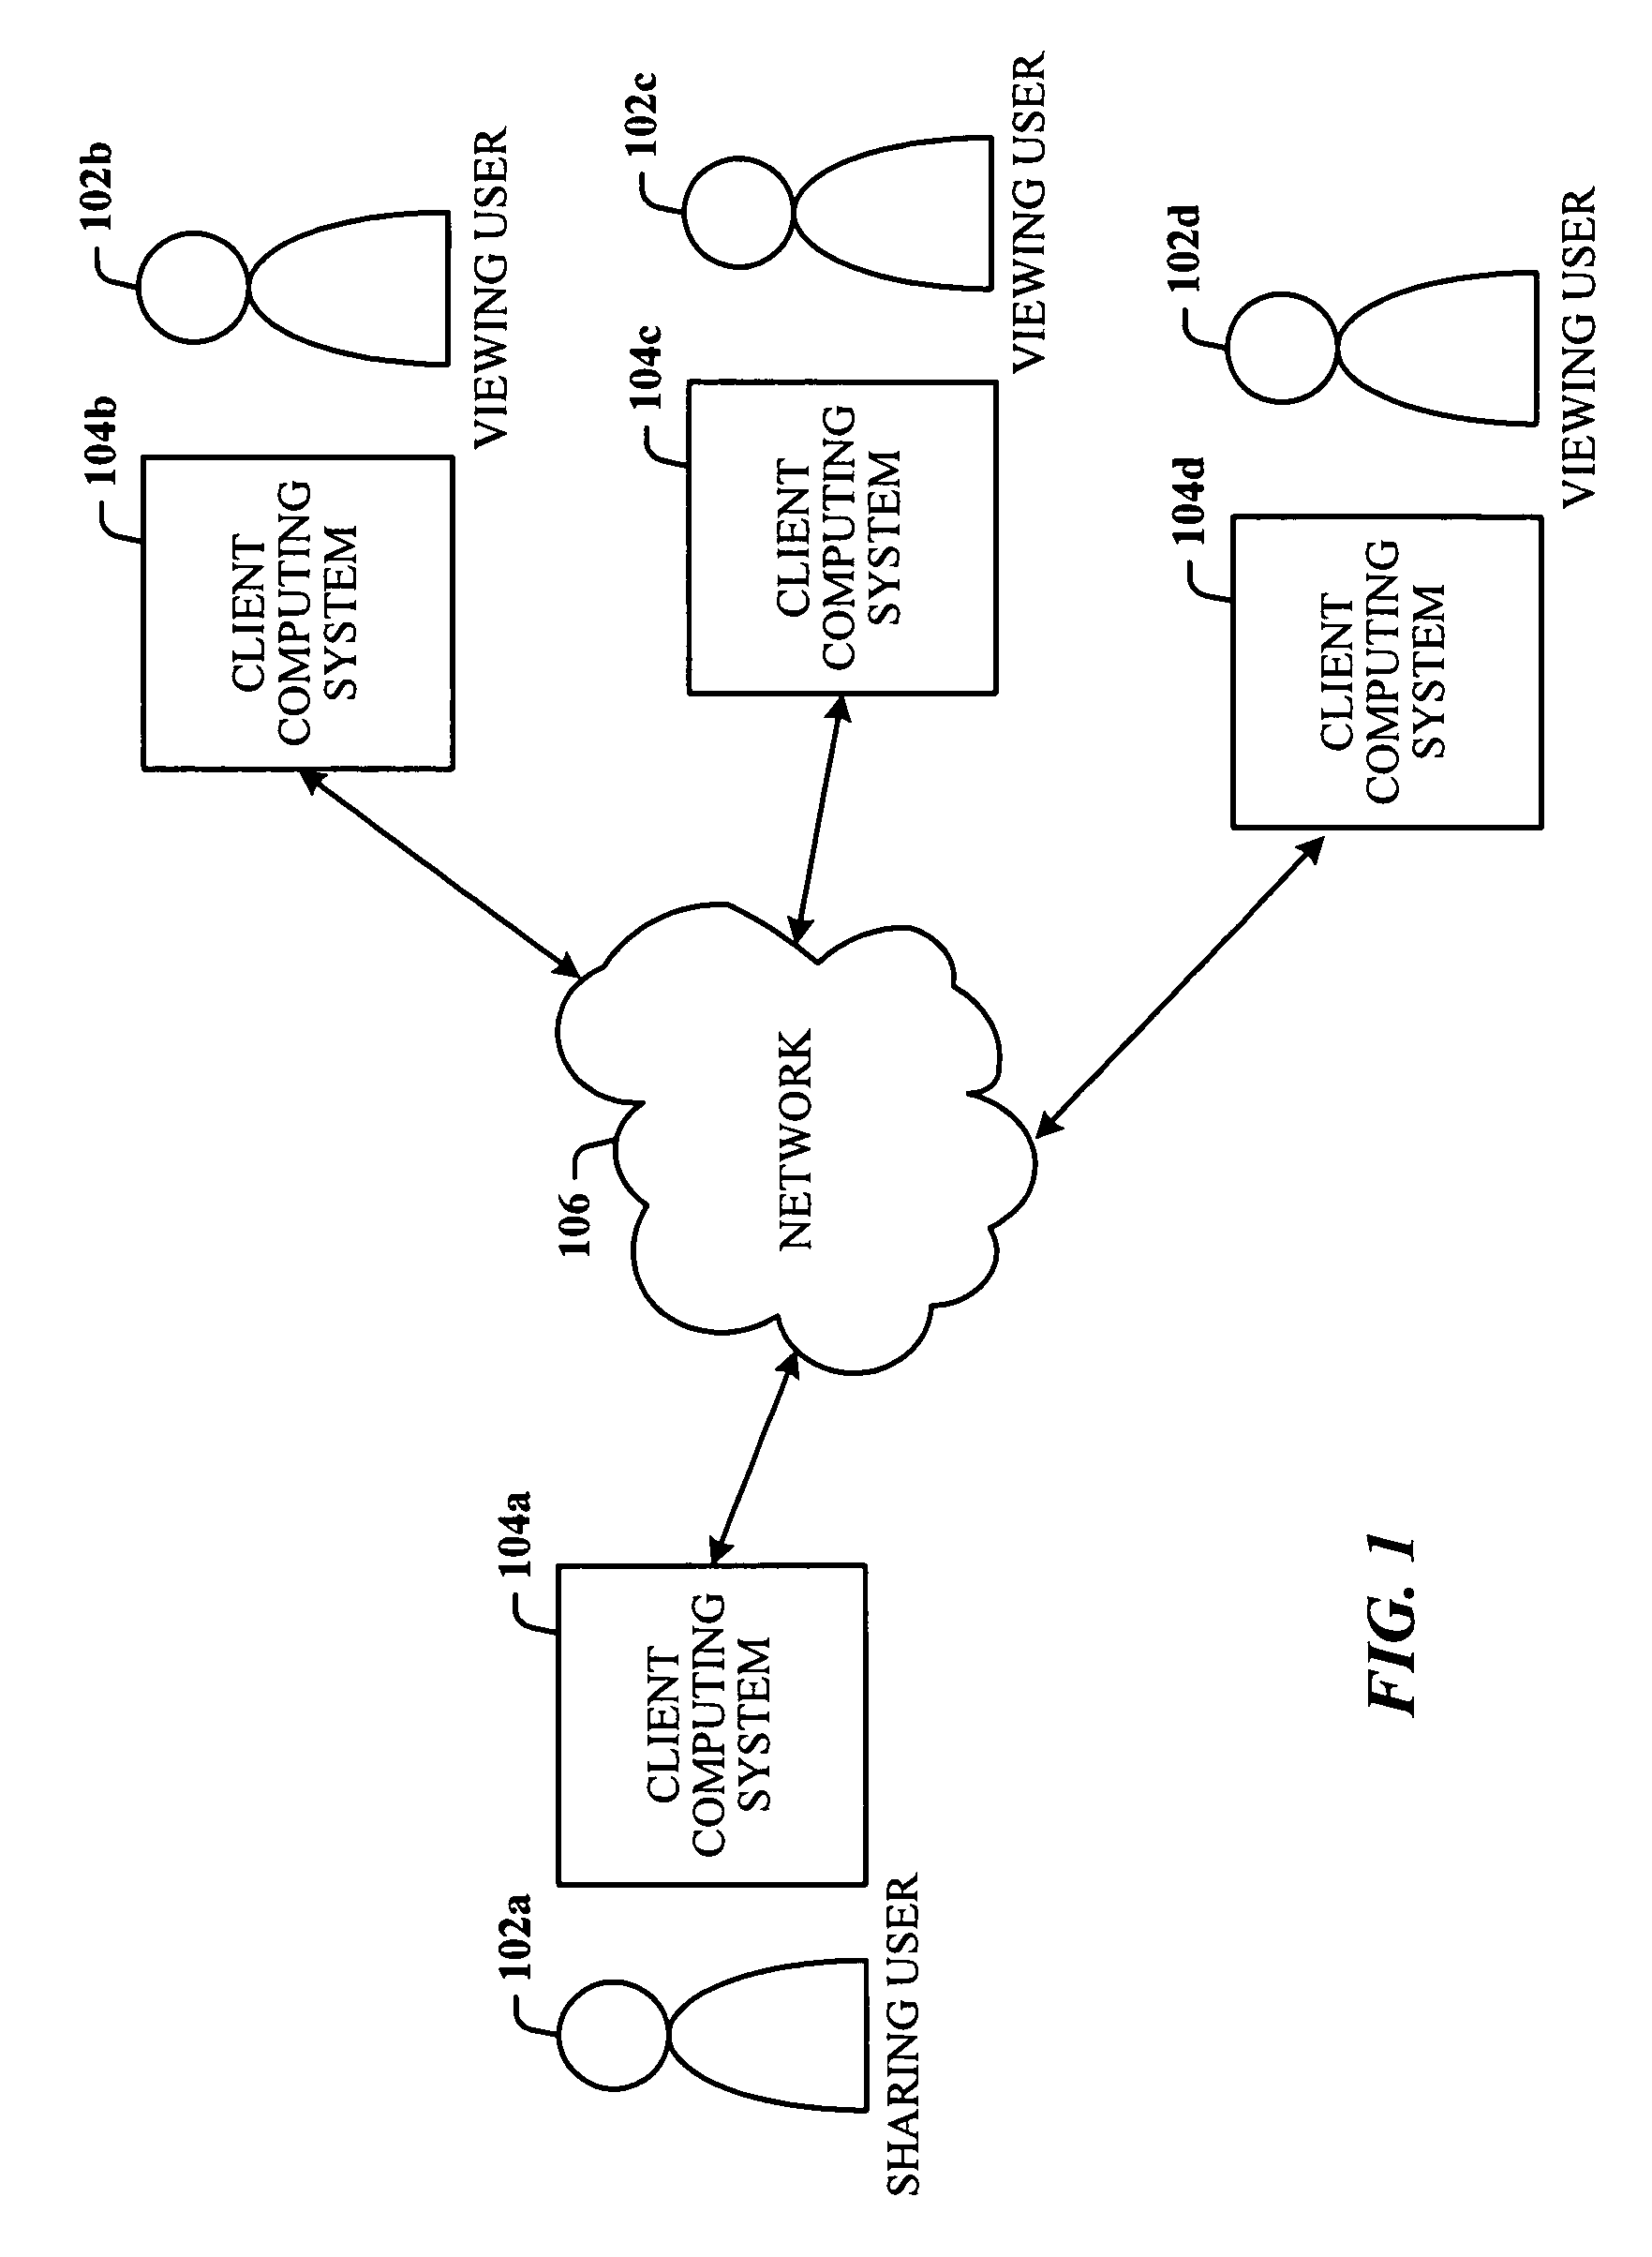 Per-user application rendering in the presence of application sharing